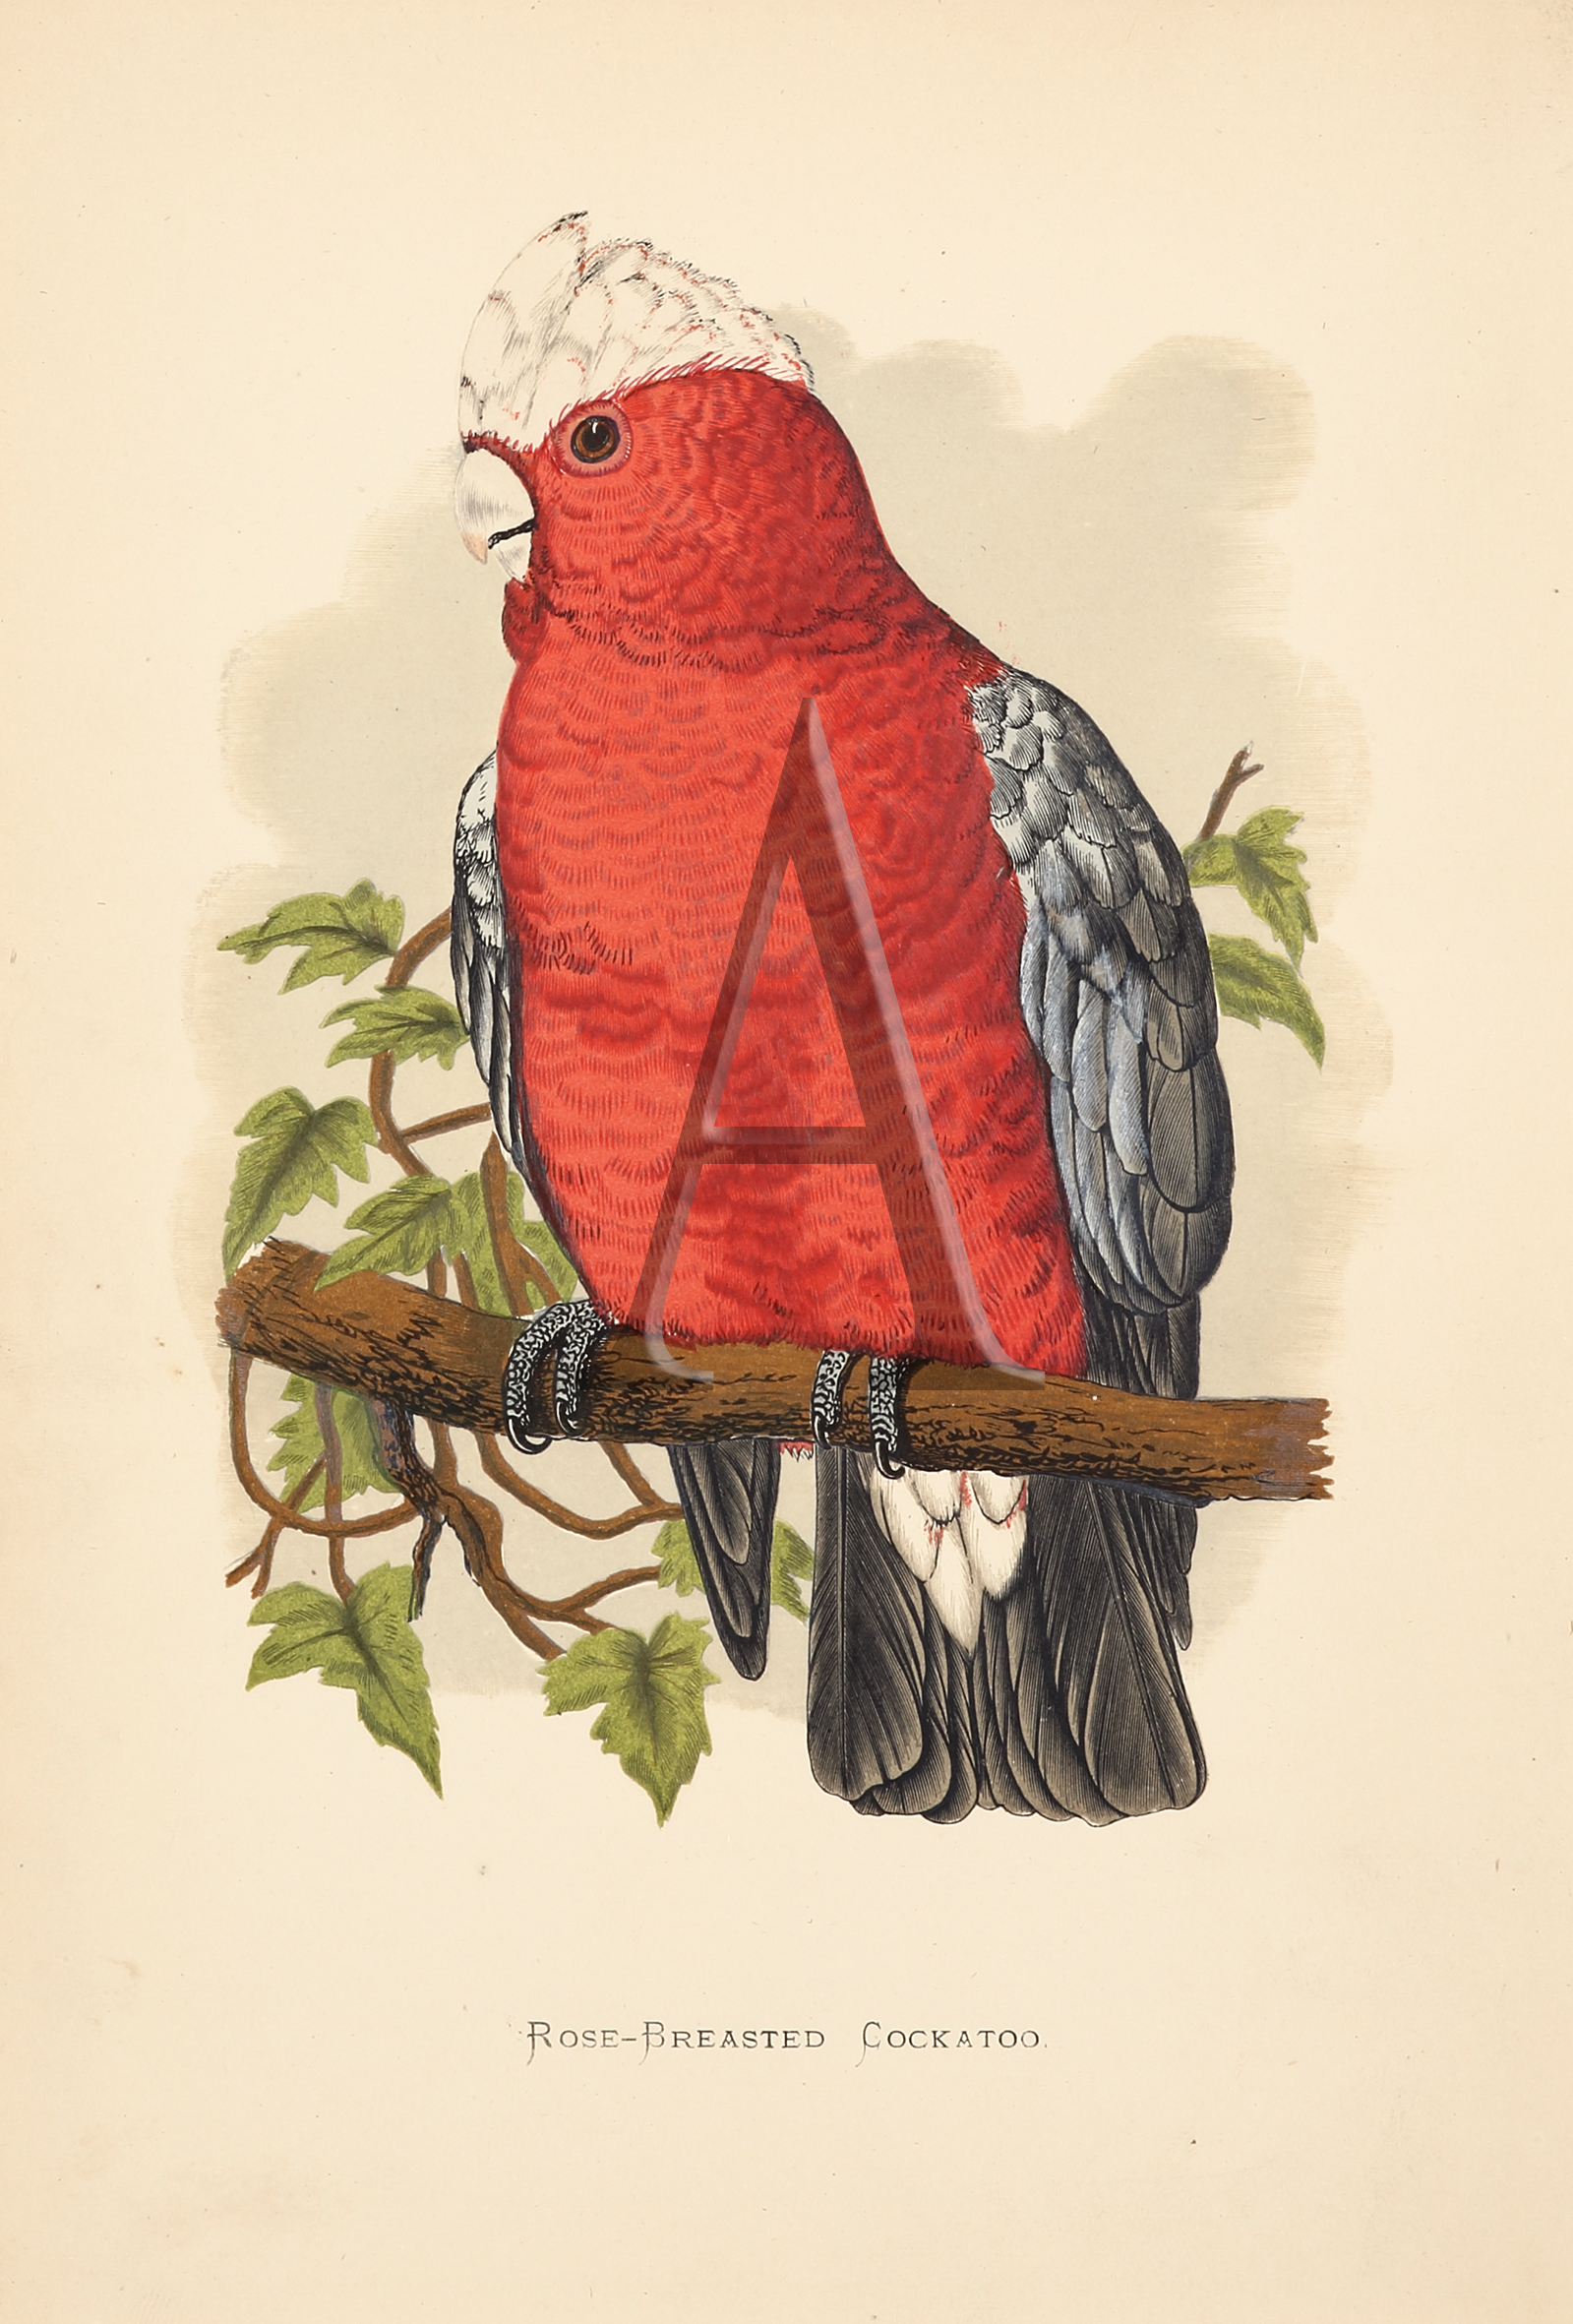 Rose-Breasted Cockatoo - Antique Print from 1884